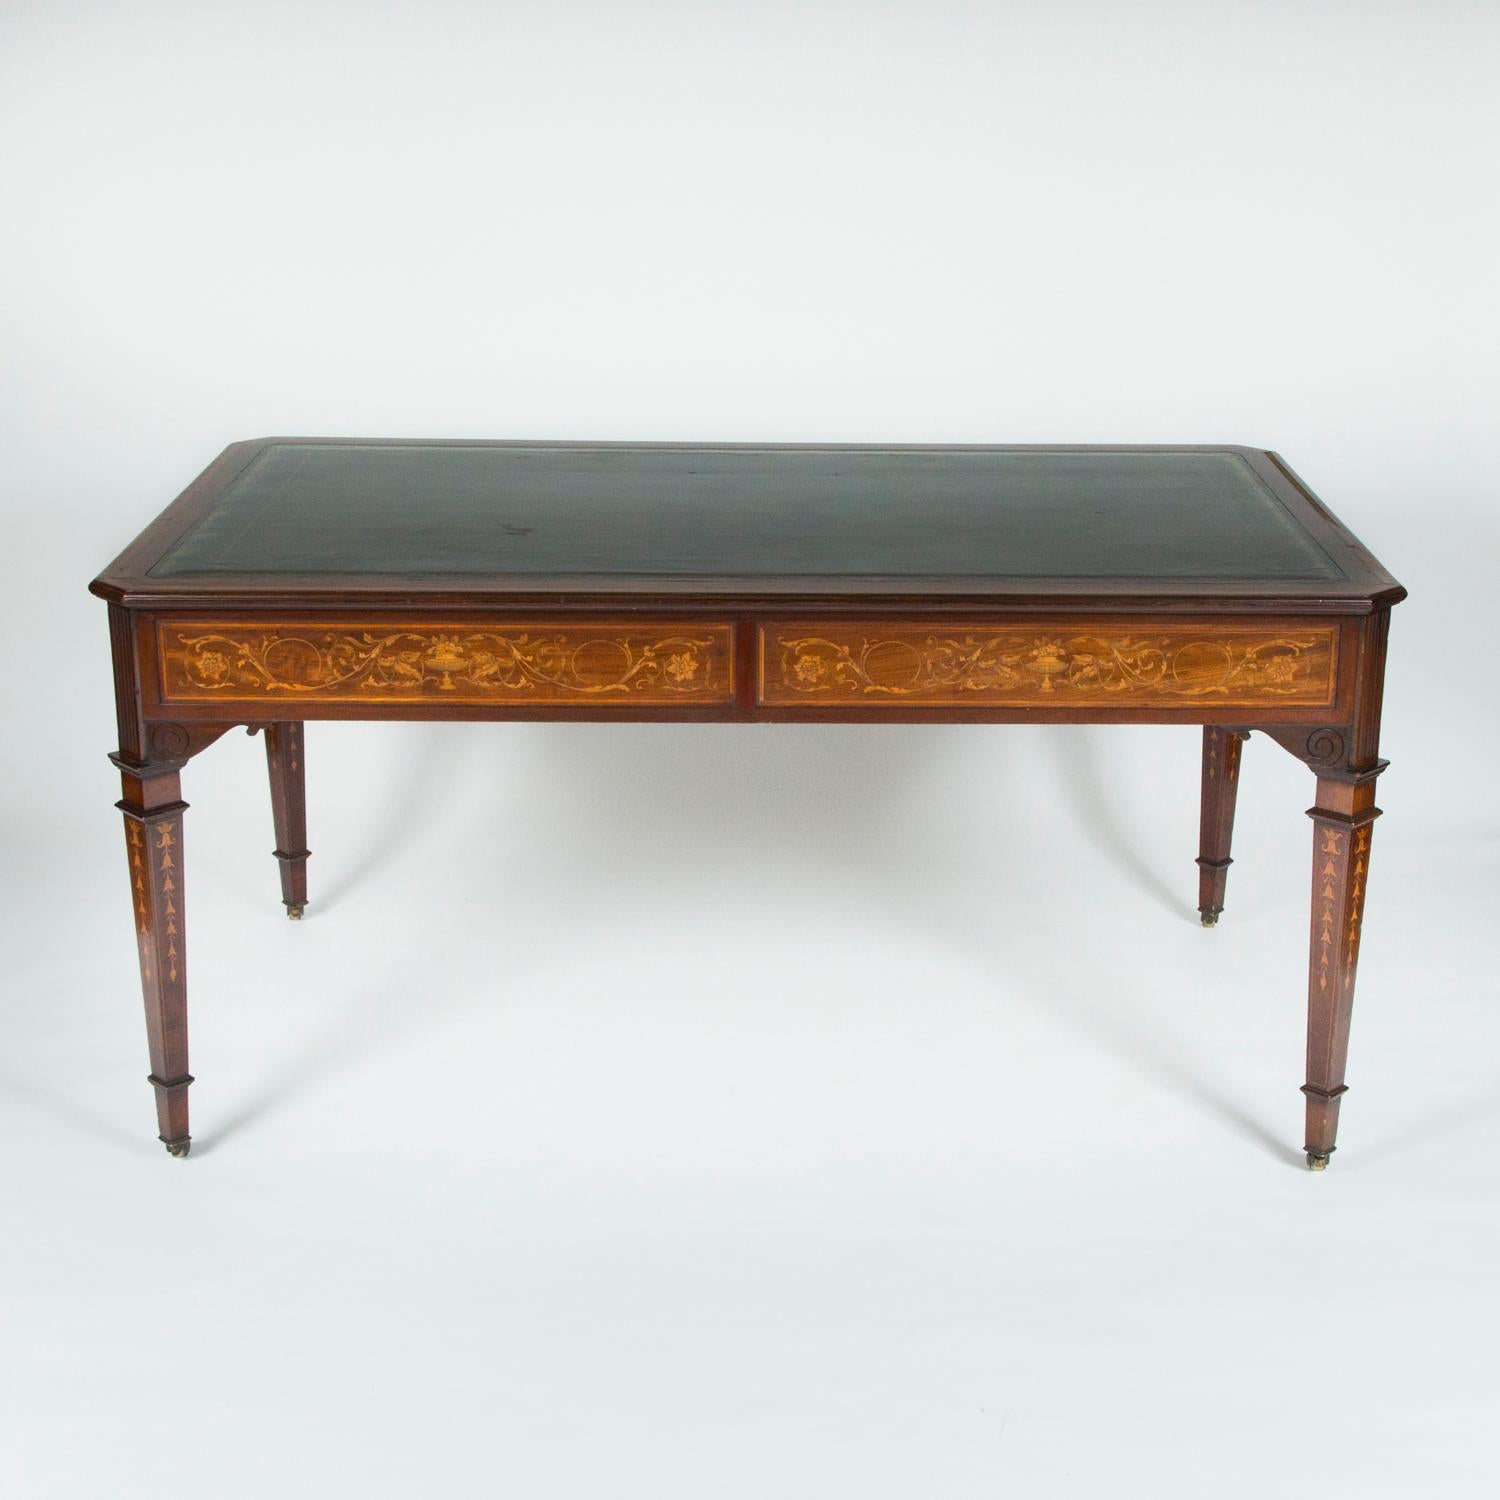 English Mahogany writing table with detailed floral marquetry & carved decoration For Sale